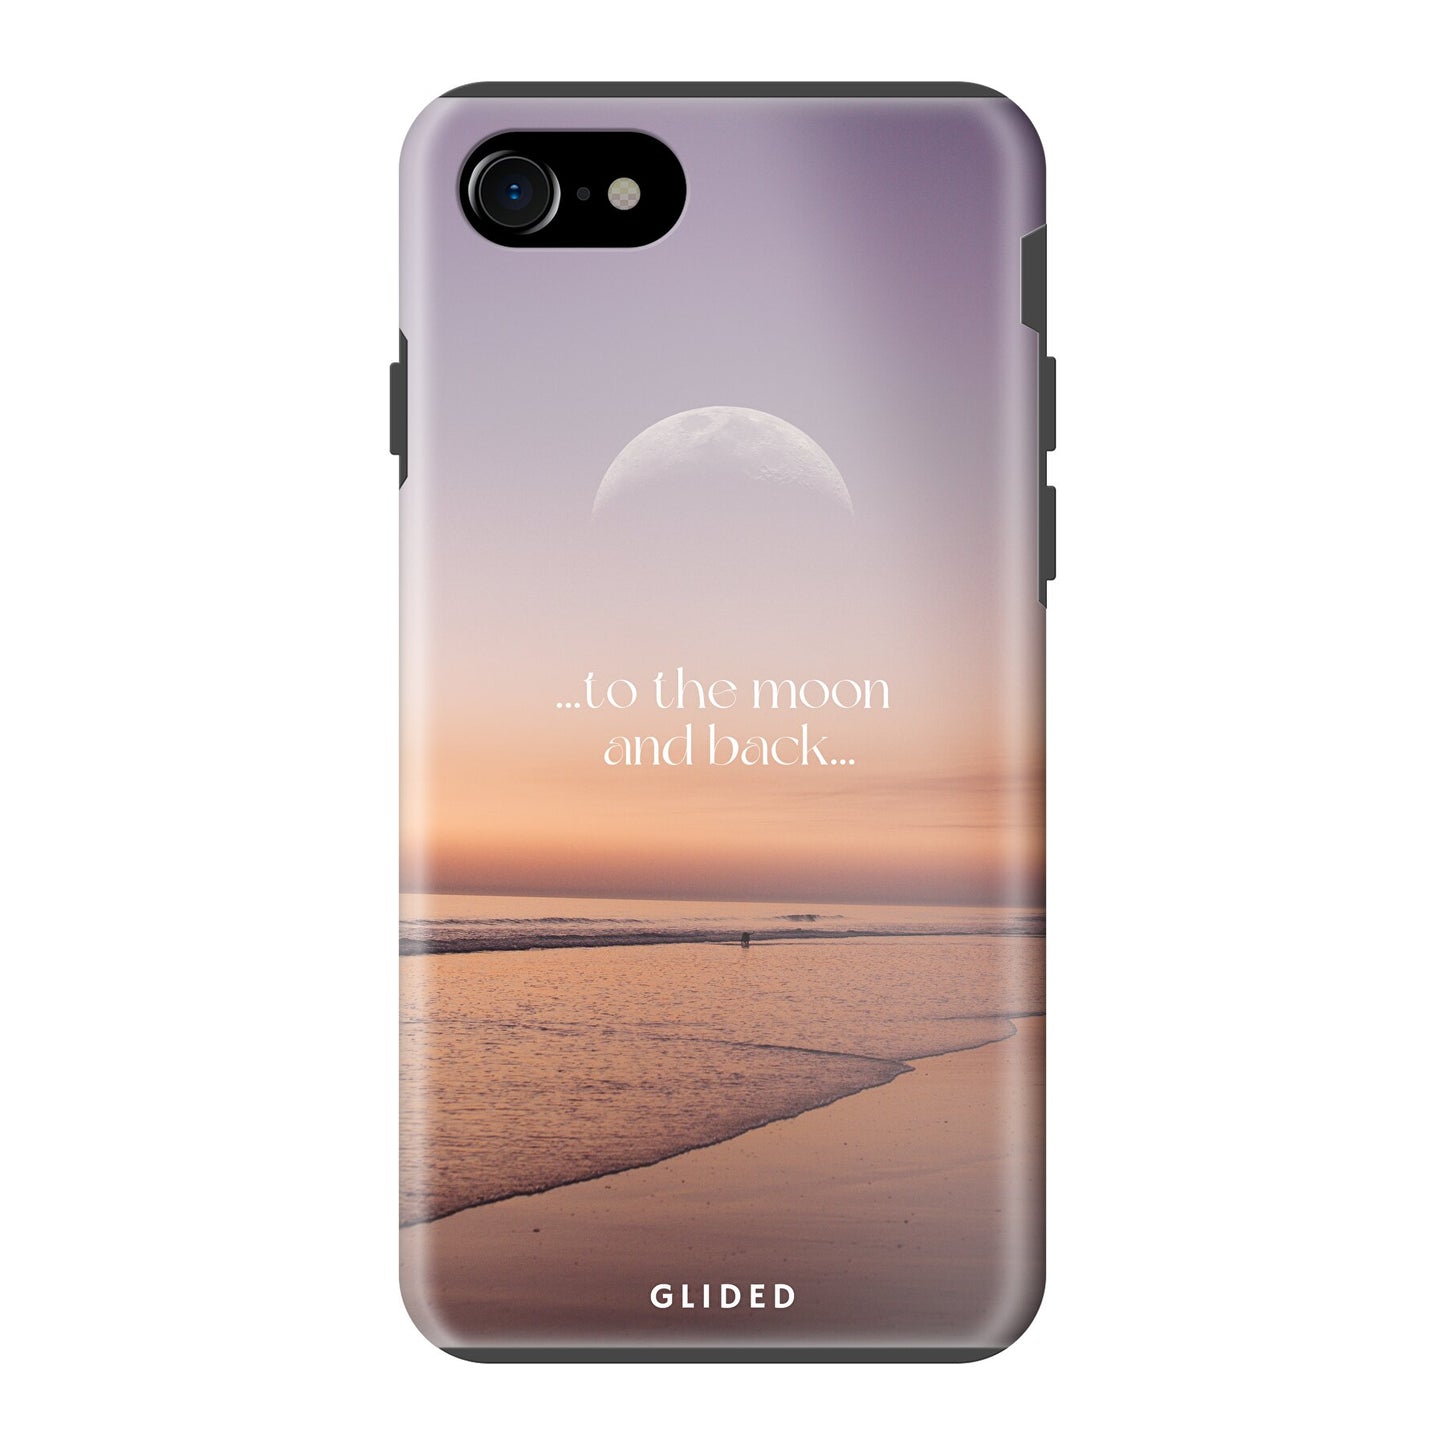 To the Moon - iPhone 7 - Tough case